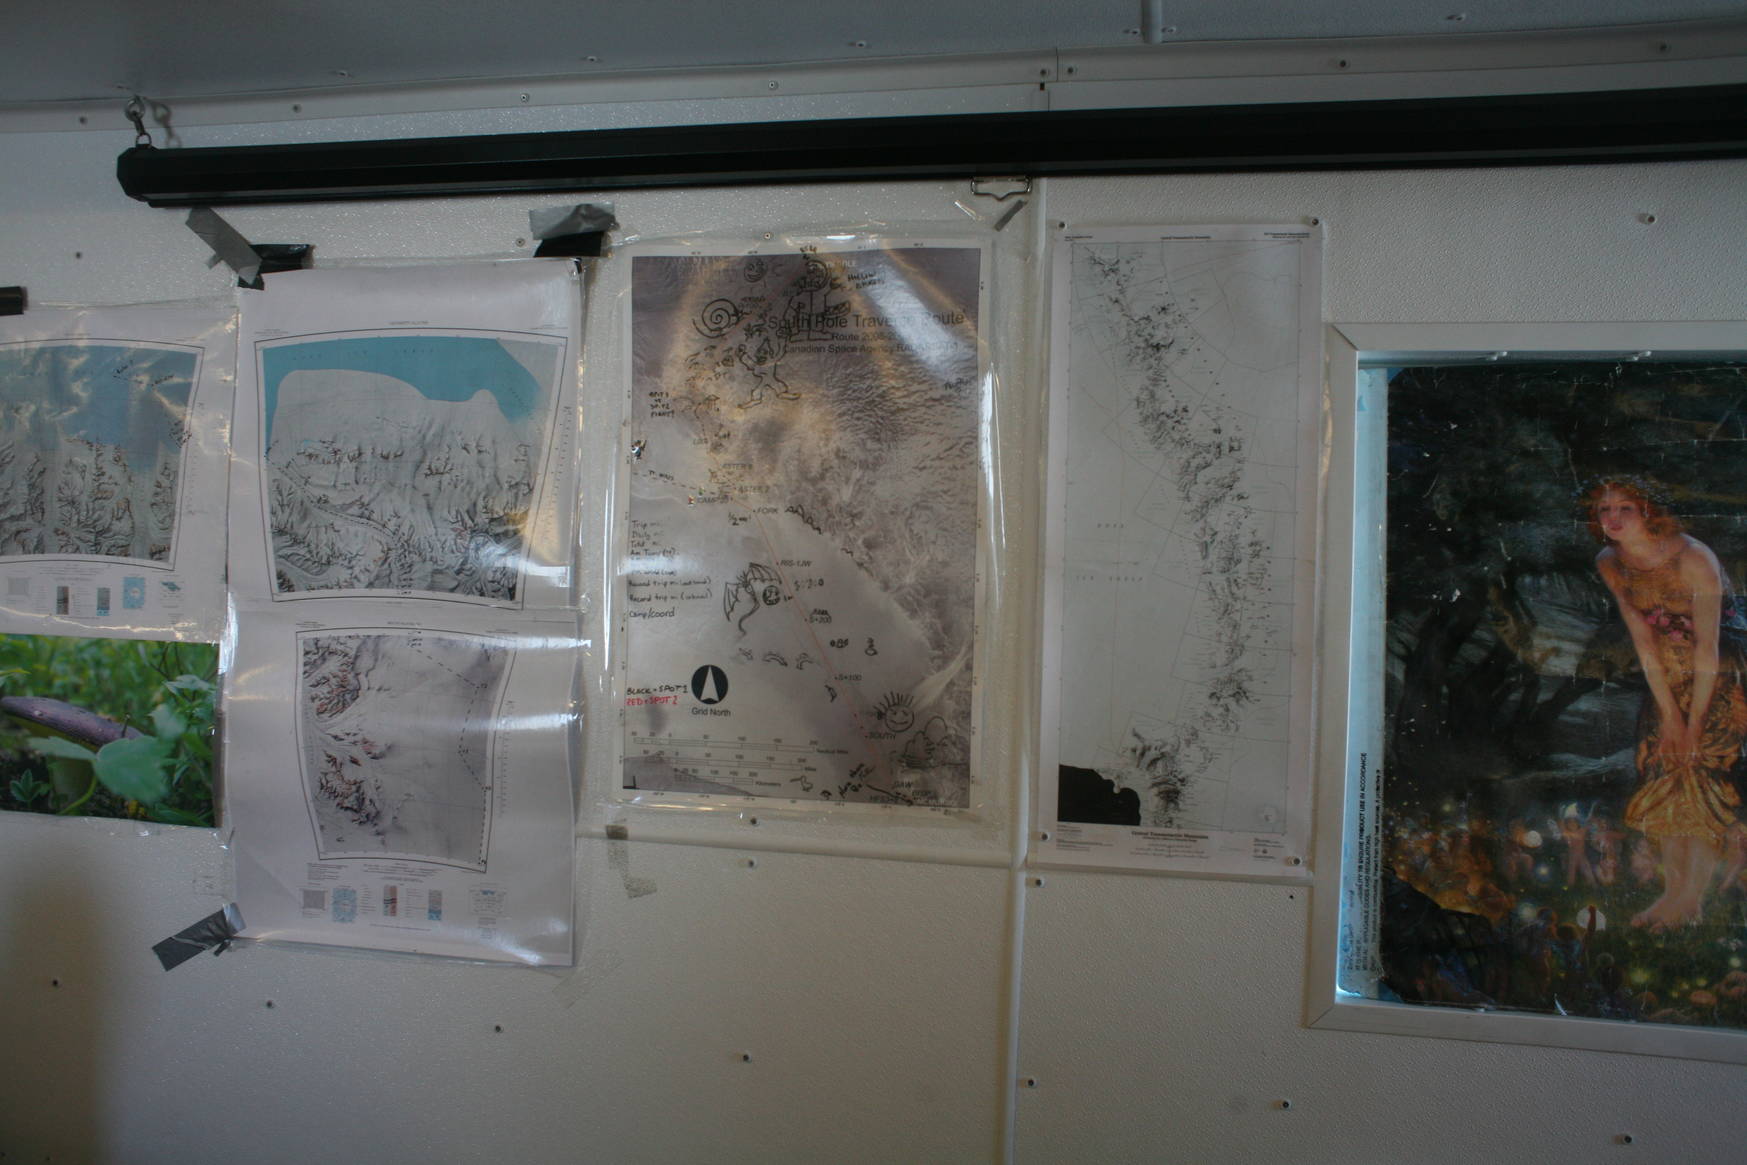 Maps showing the route that the south pole traverse takes.